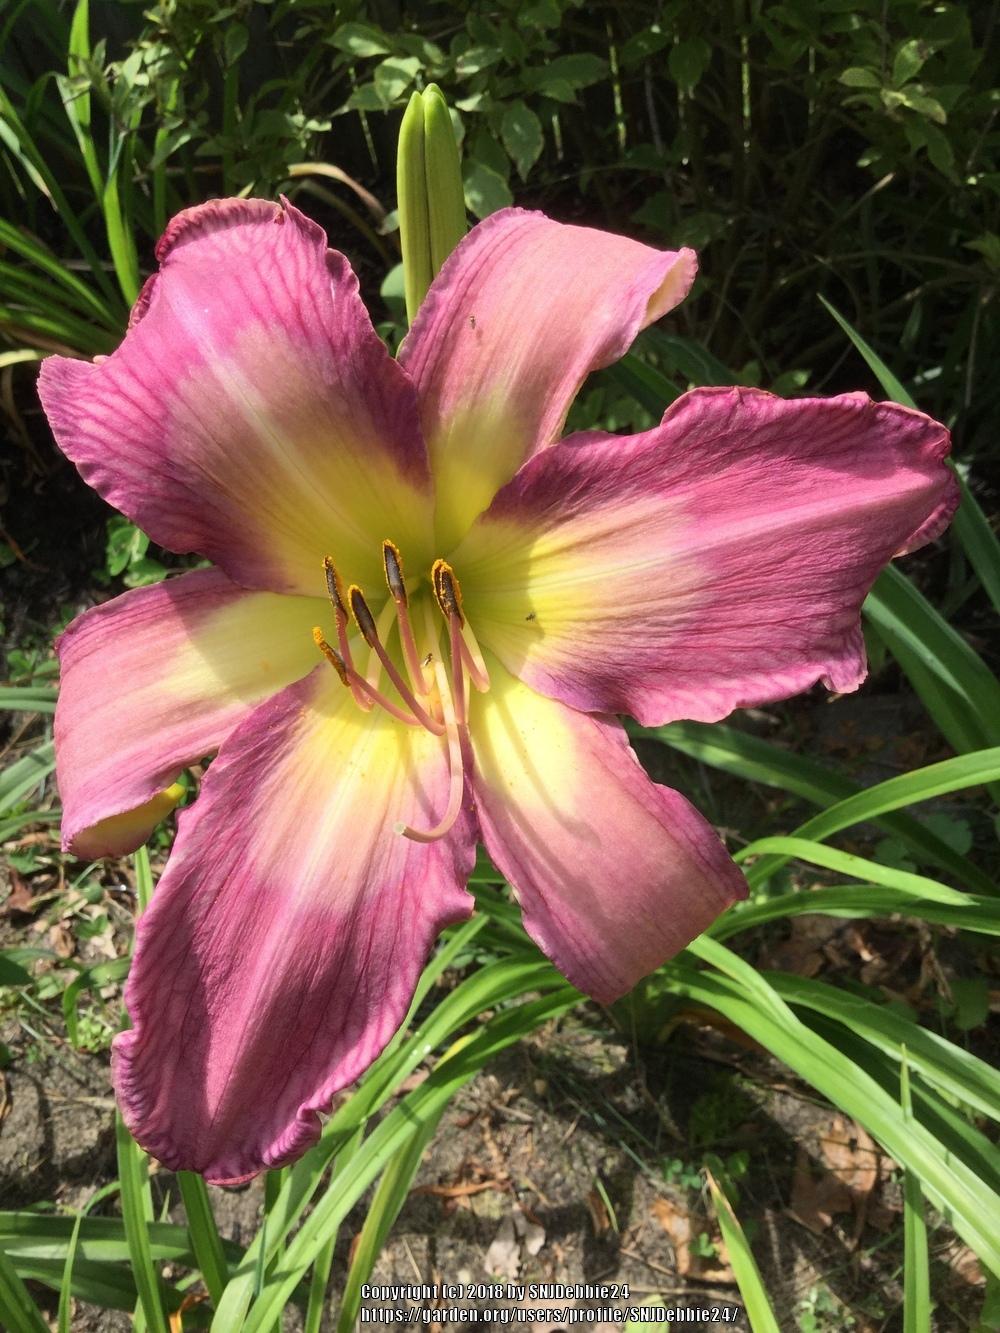 Photo of Daylily (Hemerocallis 'Odds and Ends') uploaded by SNJDebbie24